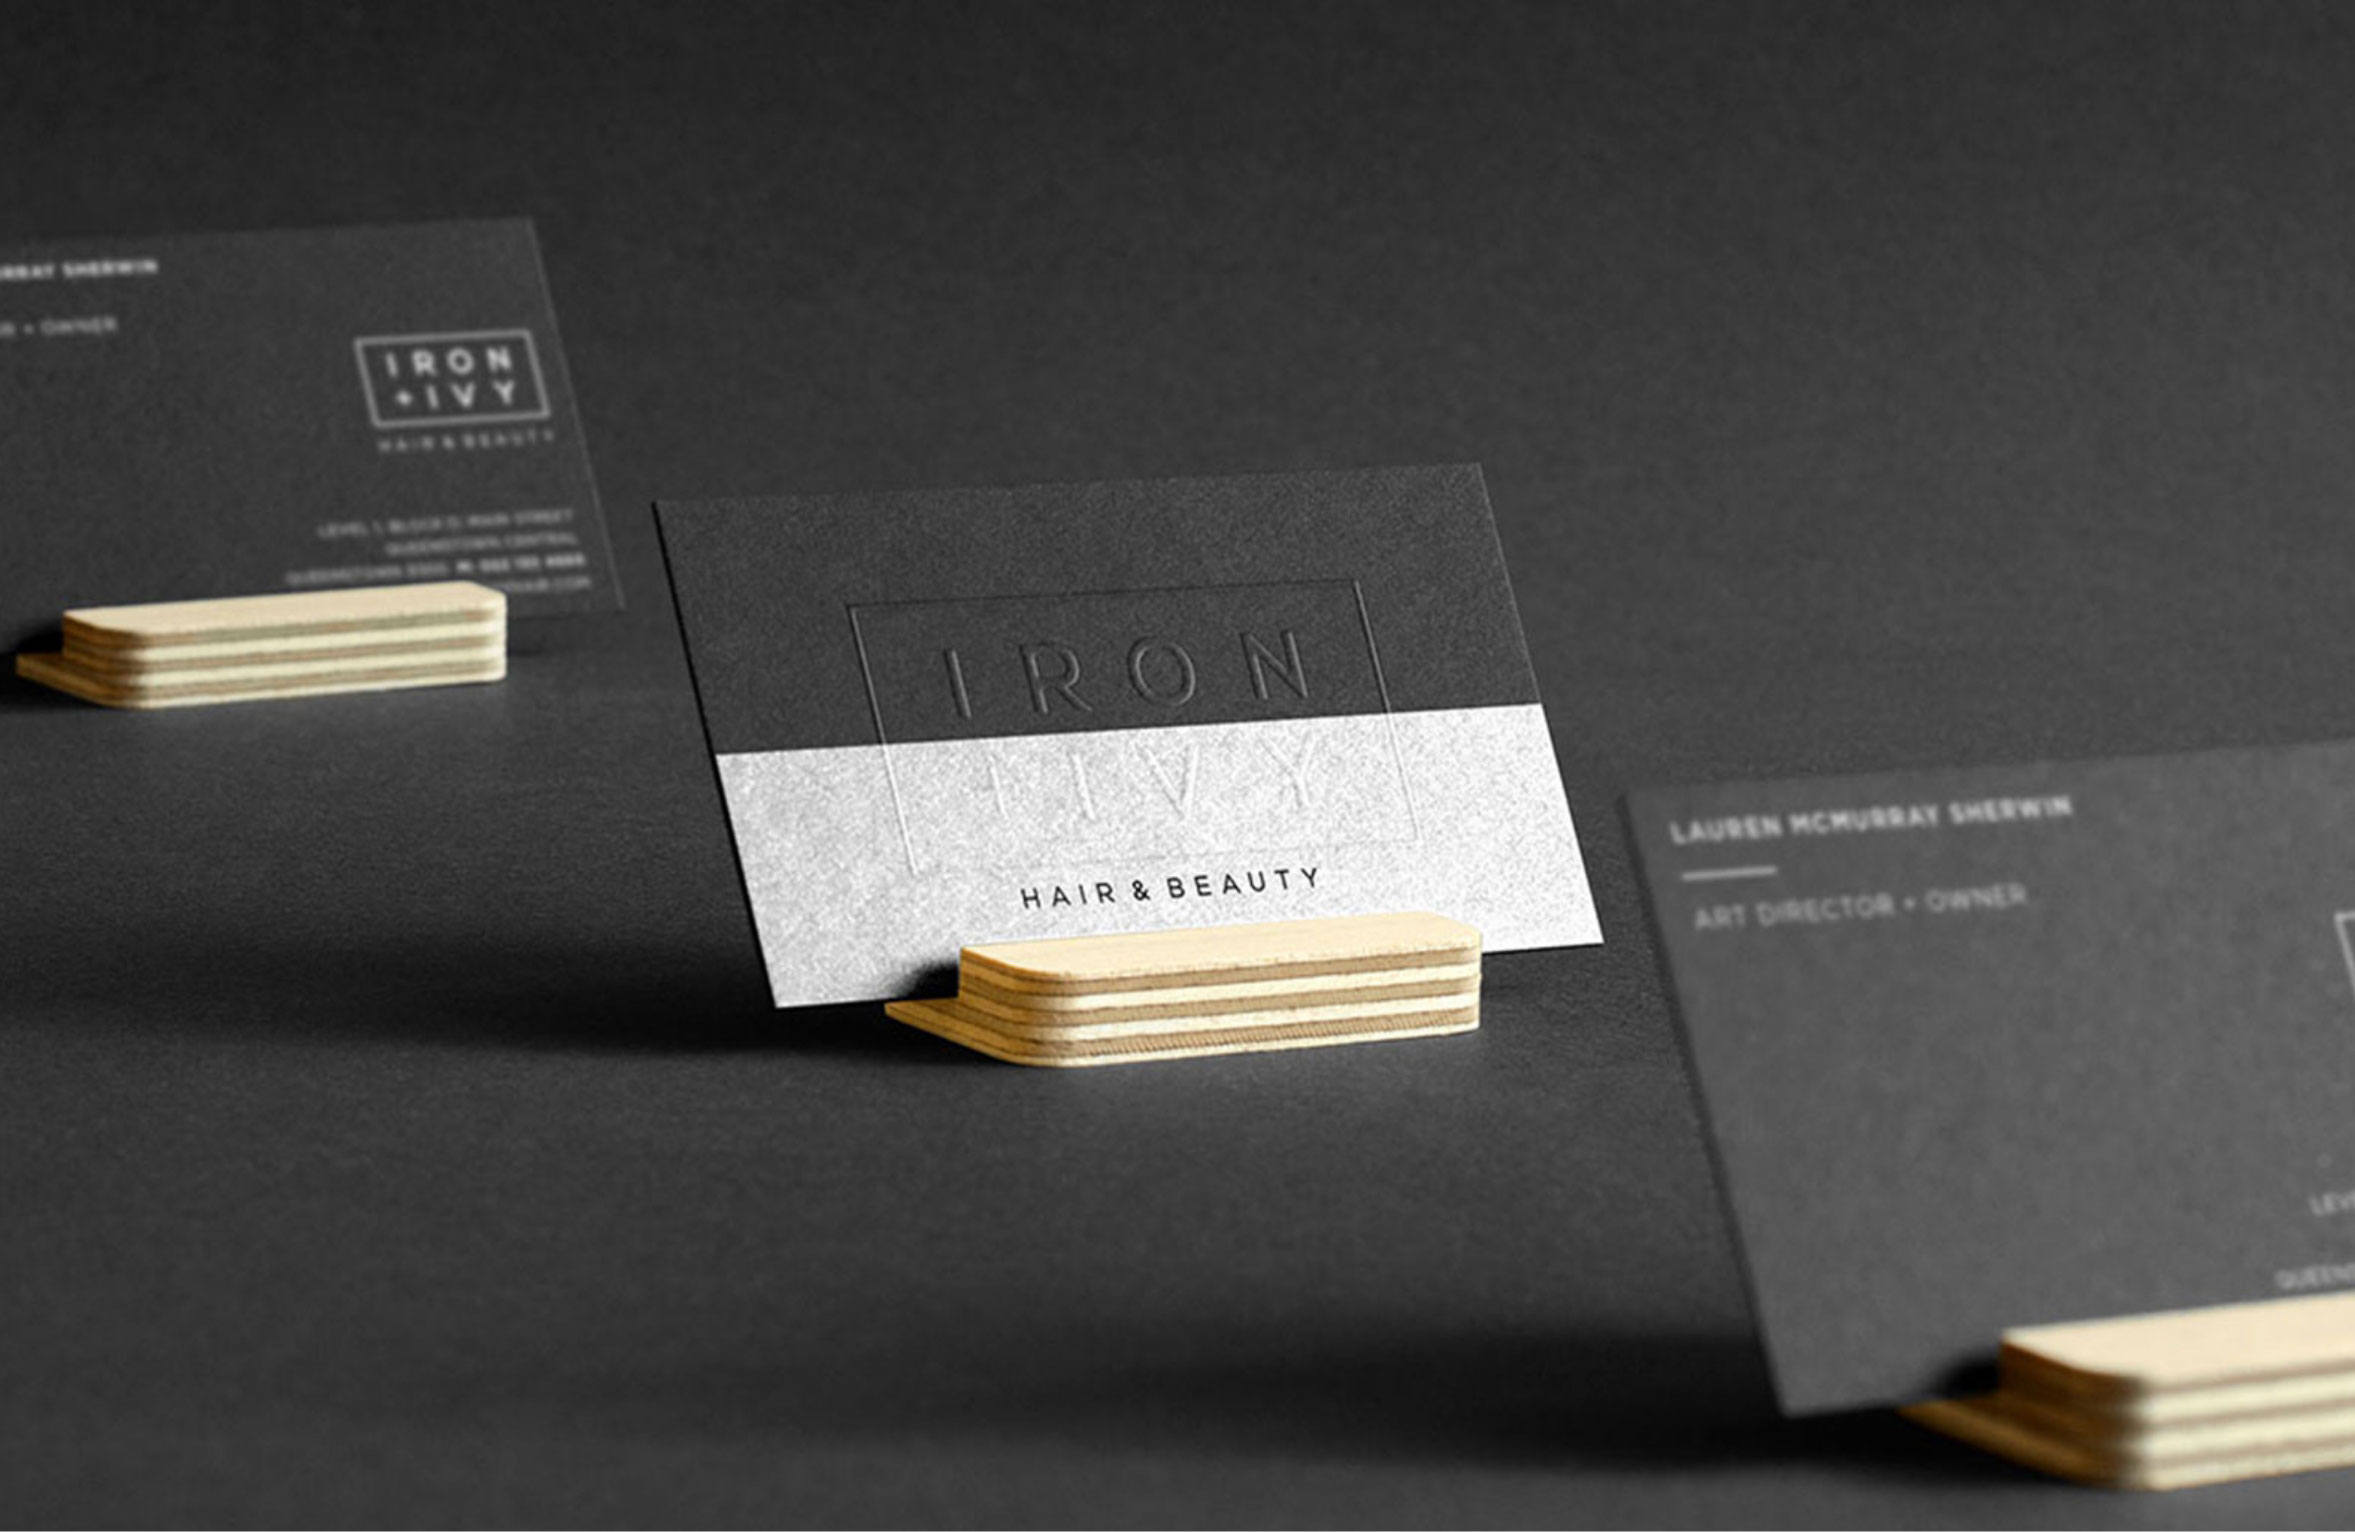 Iron + Ivy brand collateral